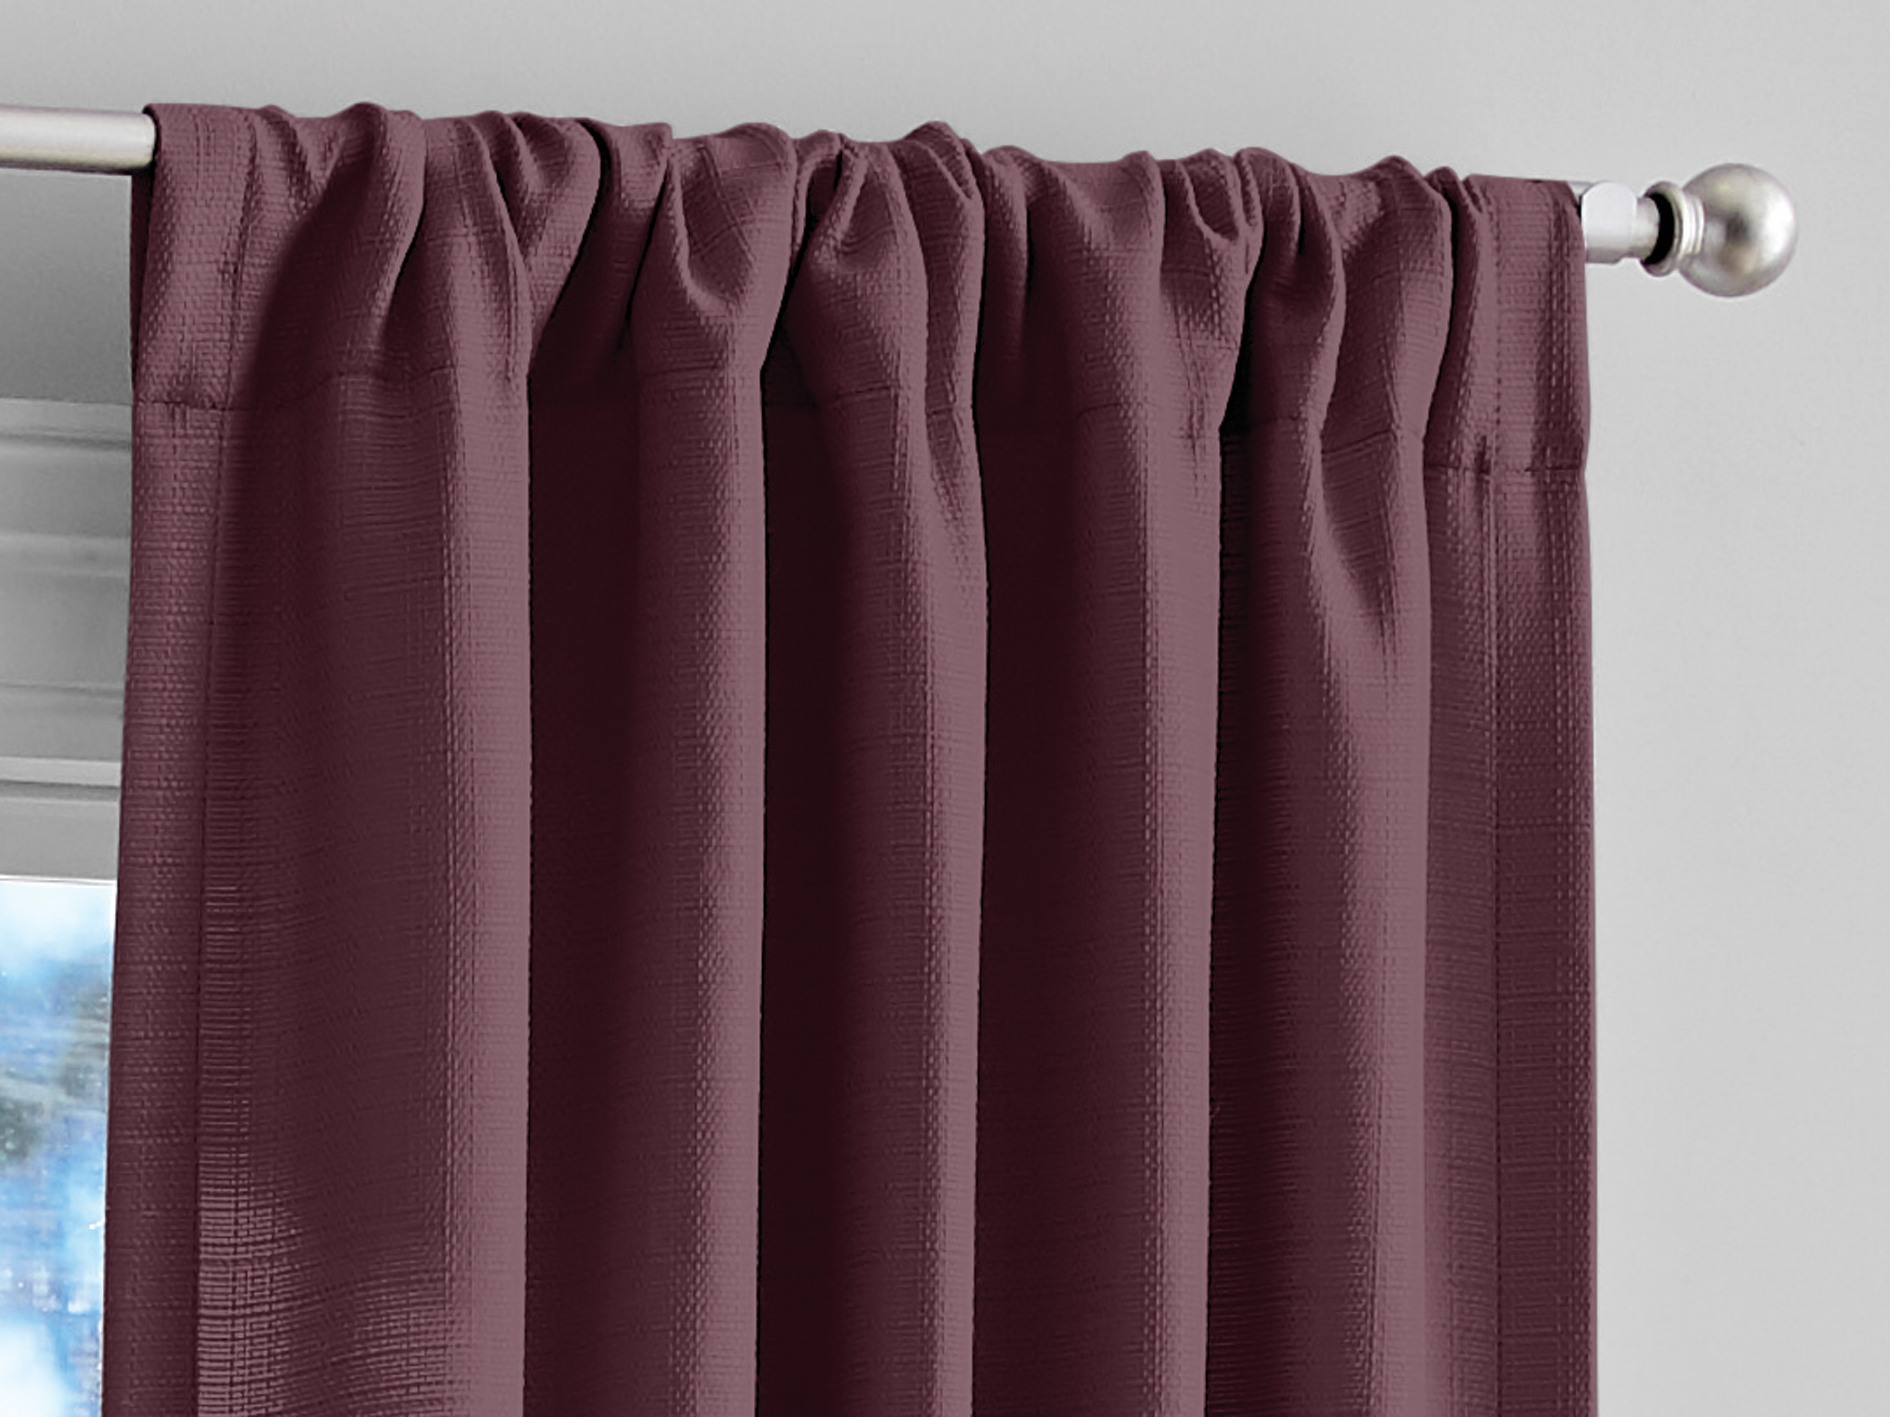 Mainstays Southport Burgundy Solid Color Light Filtering Rod Pocket Curtain Panel Pair, 40" x 84" - image 4 of 10